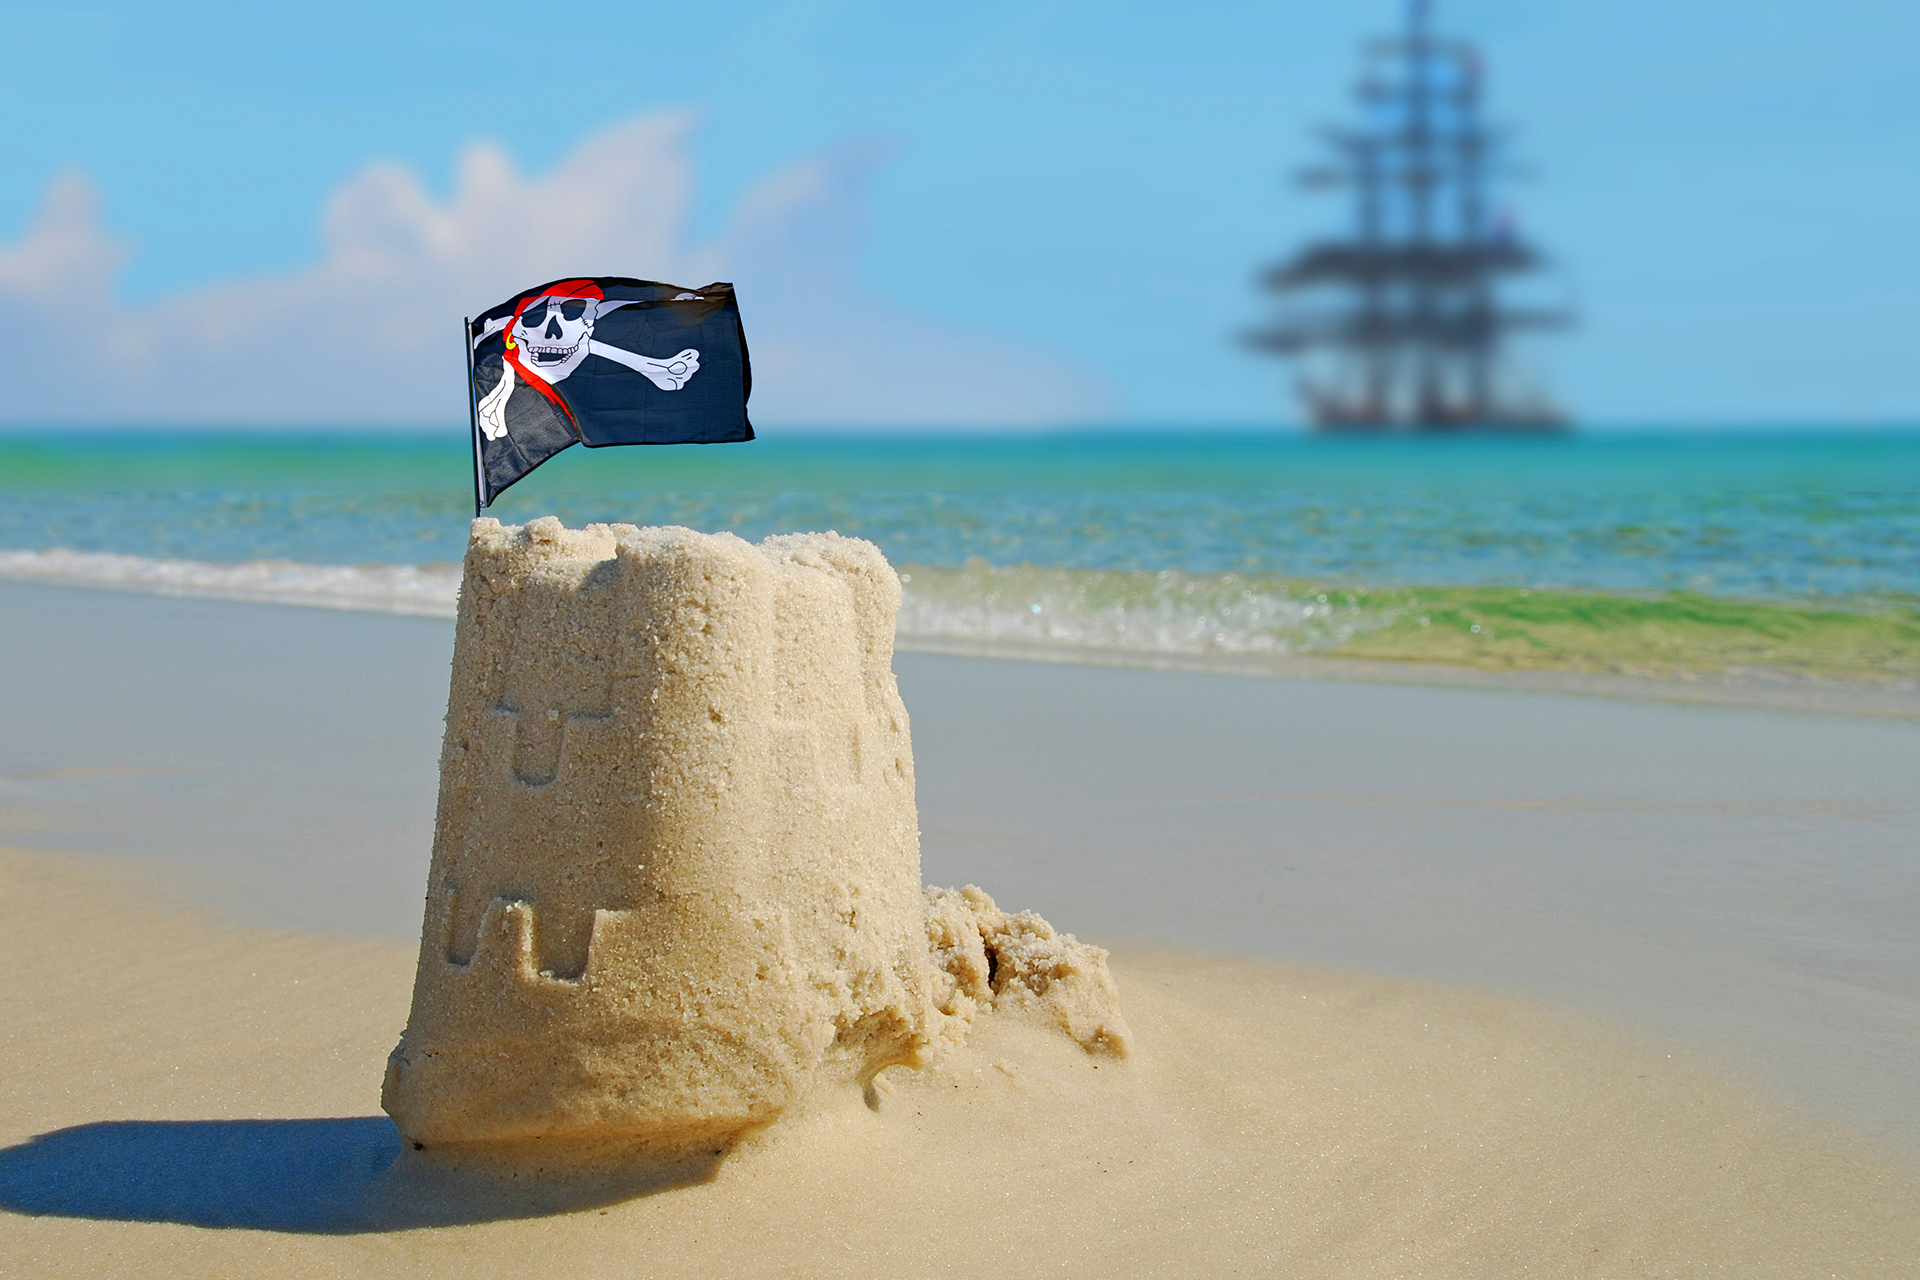 a small sandcastle on the beach with a pirate flag stuck in the top and in the distance a pirate ship in the water